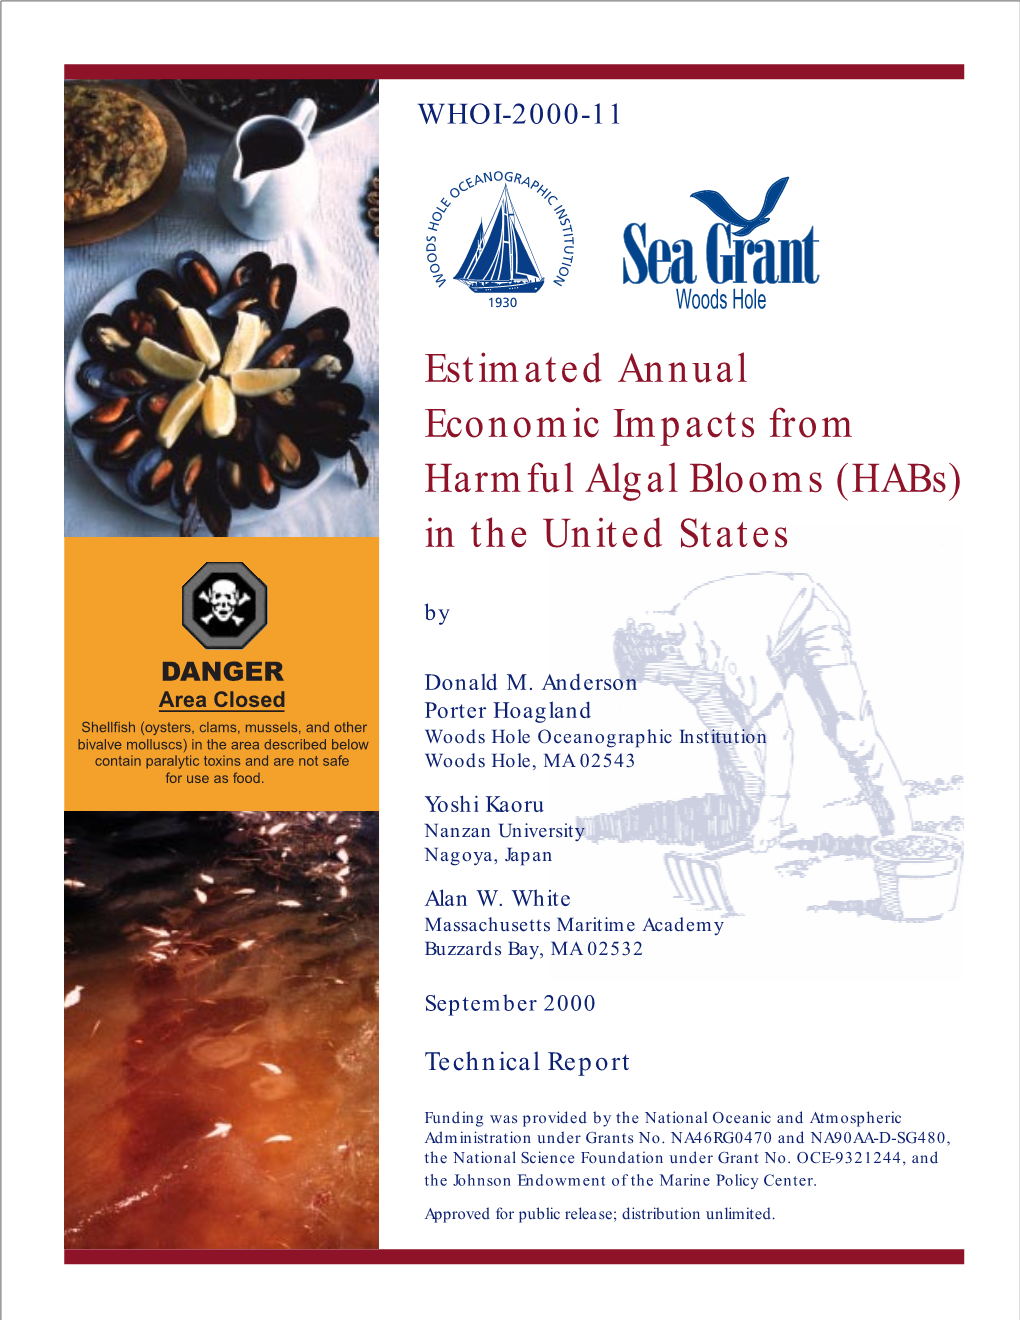 Estimated Annual Economic Impacts from Harmful Algal Blooms (Habs) in the United States